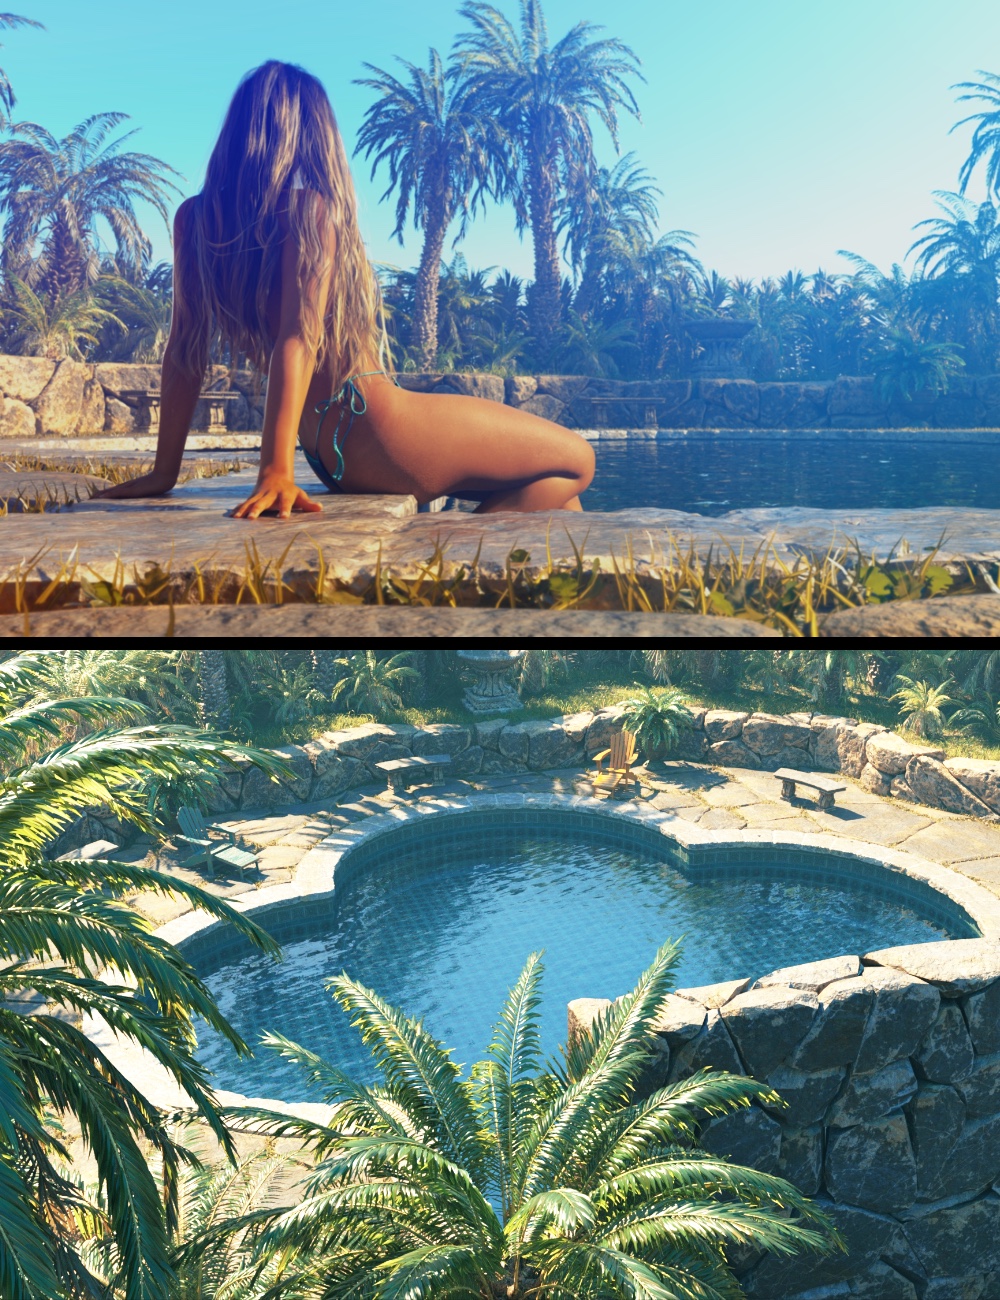 Natural Stone Poolside and Scenes by: Linday, 3D Models by Daz 3D